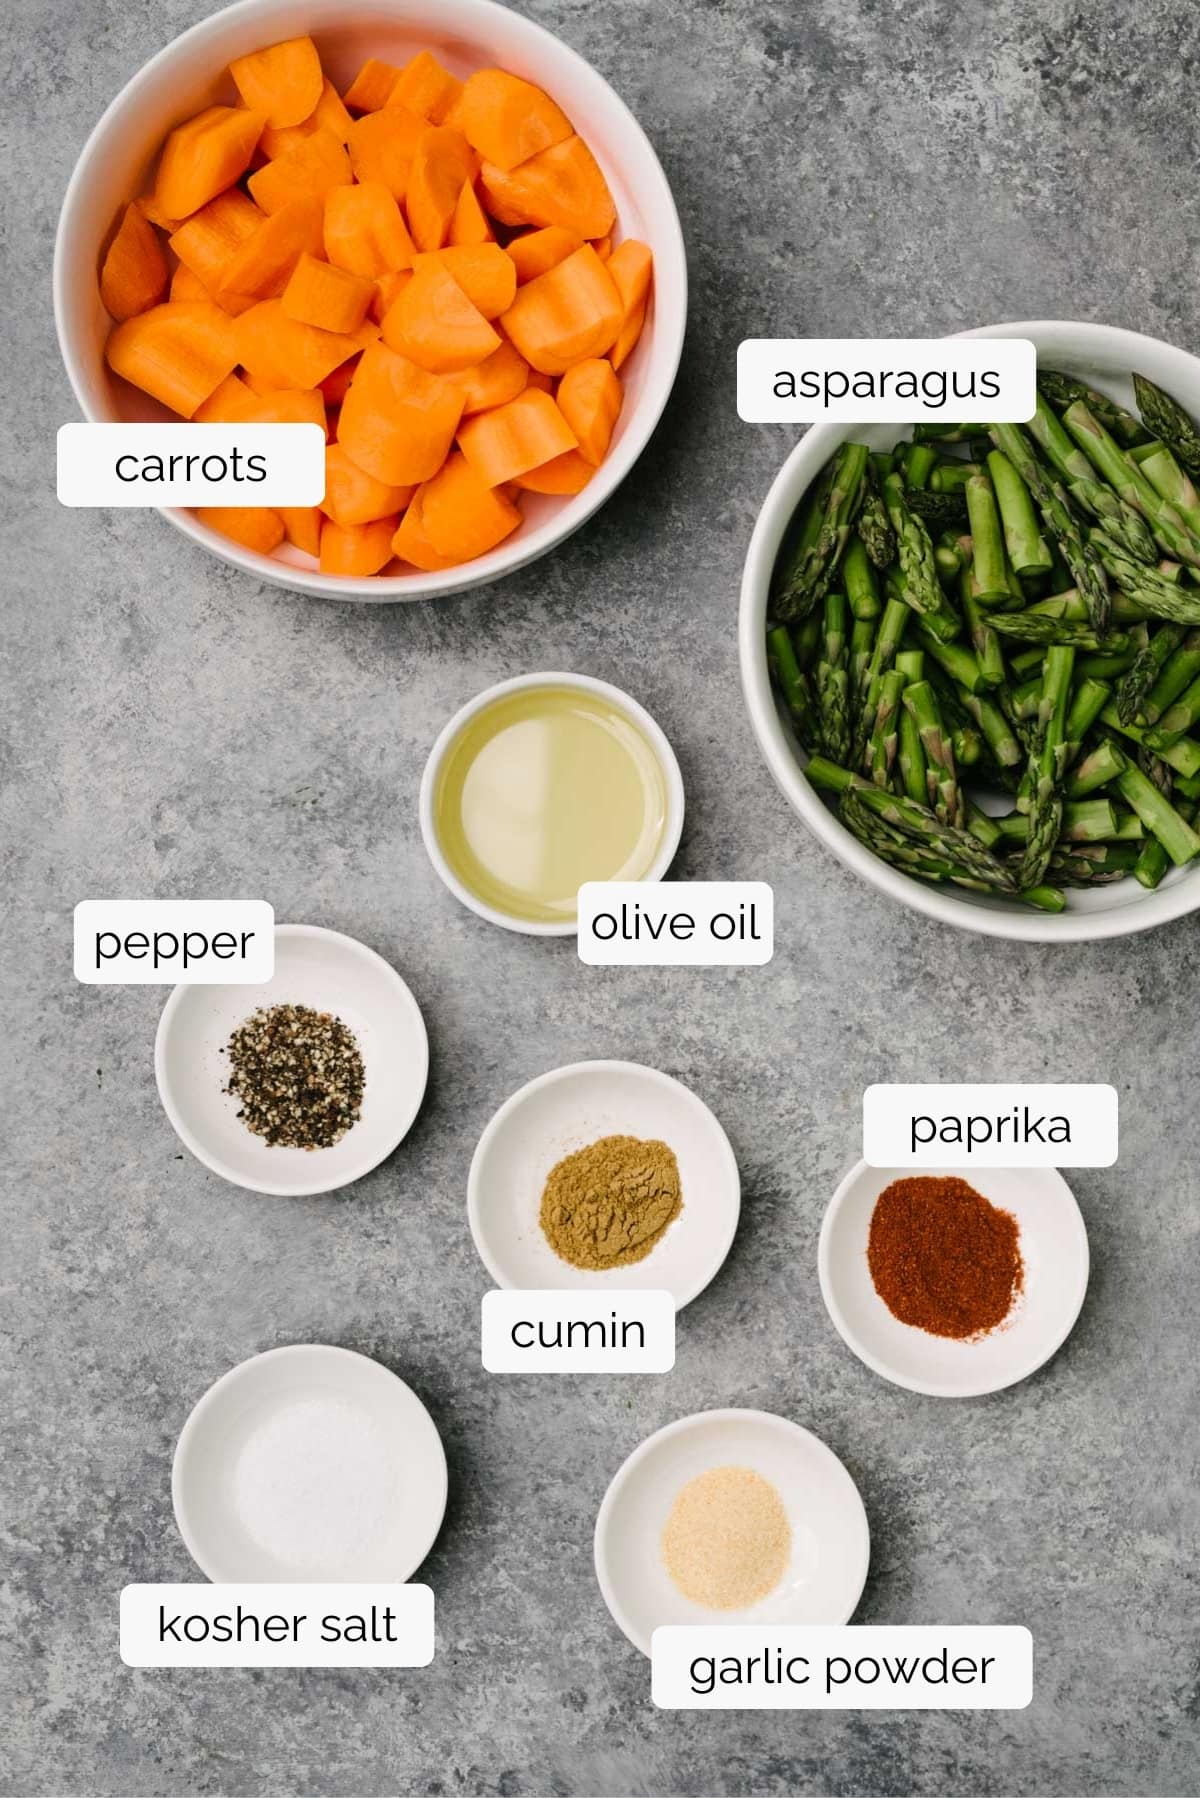 The ingredients for roasted carrots and asparagus in small bowls arranged on a concrete background - sliced carrots, chopped asparagus, olive oil, salt, pepper, paprika, cumin, and garlic powder.